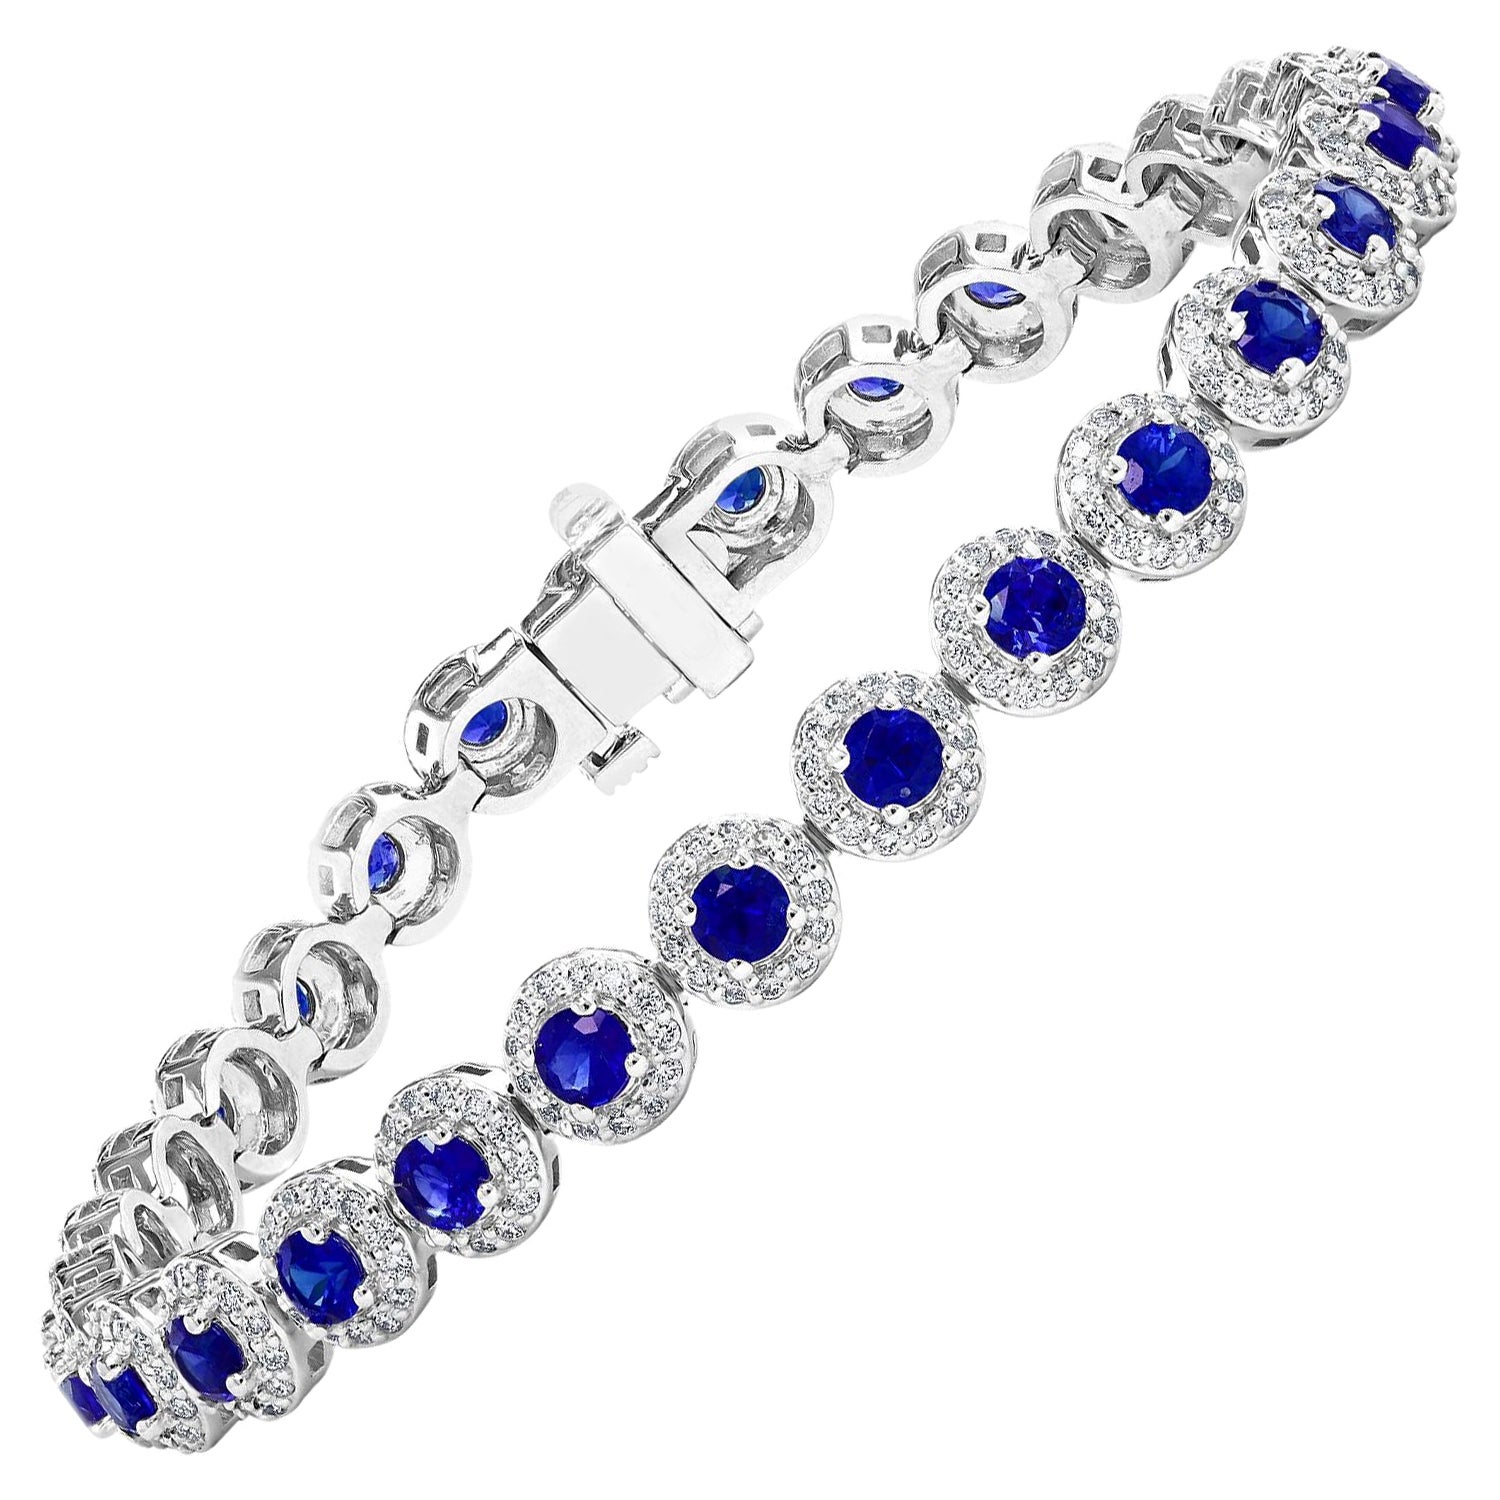 4.40 Carat Round Cut Sapphire and Diamond Tennis Bracelet in 14K White Gold For Sale